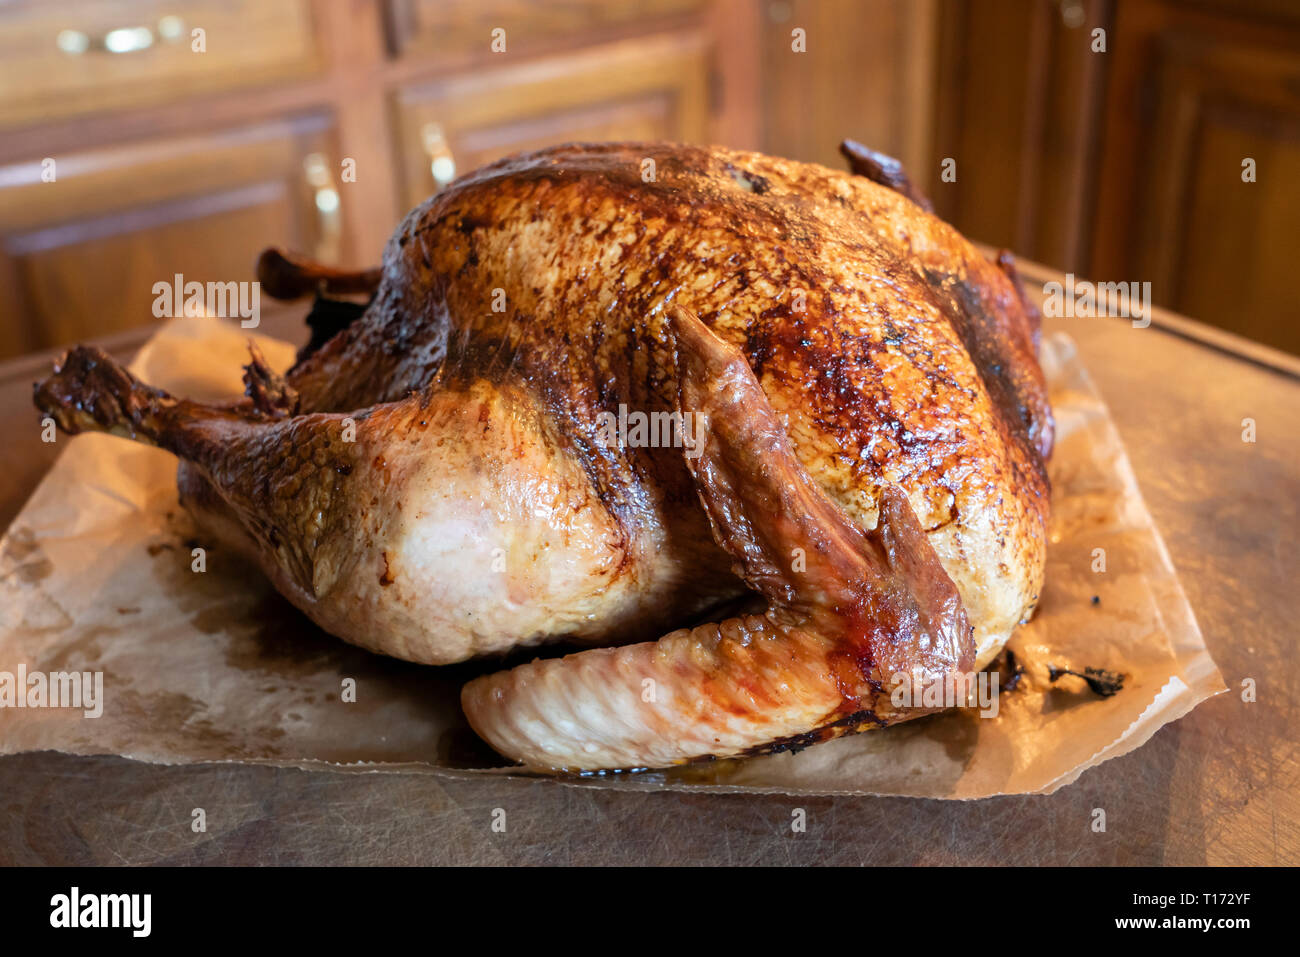 Thanksgiving turkey in the United States Stock Photo